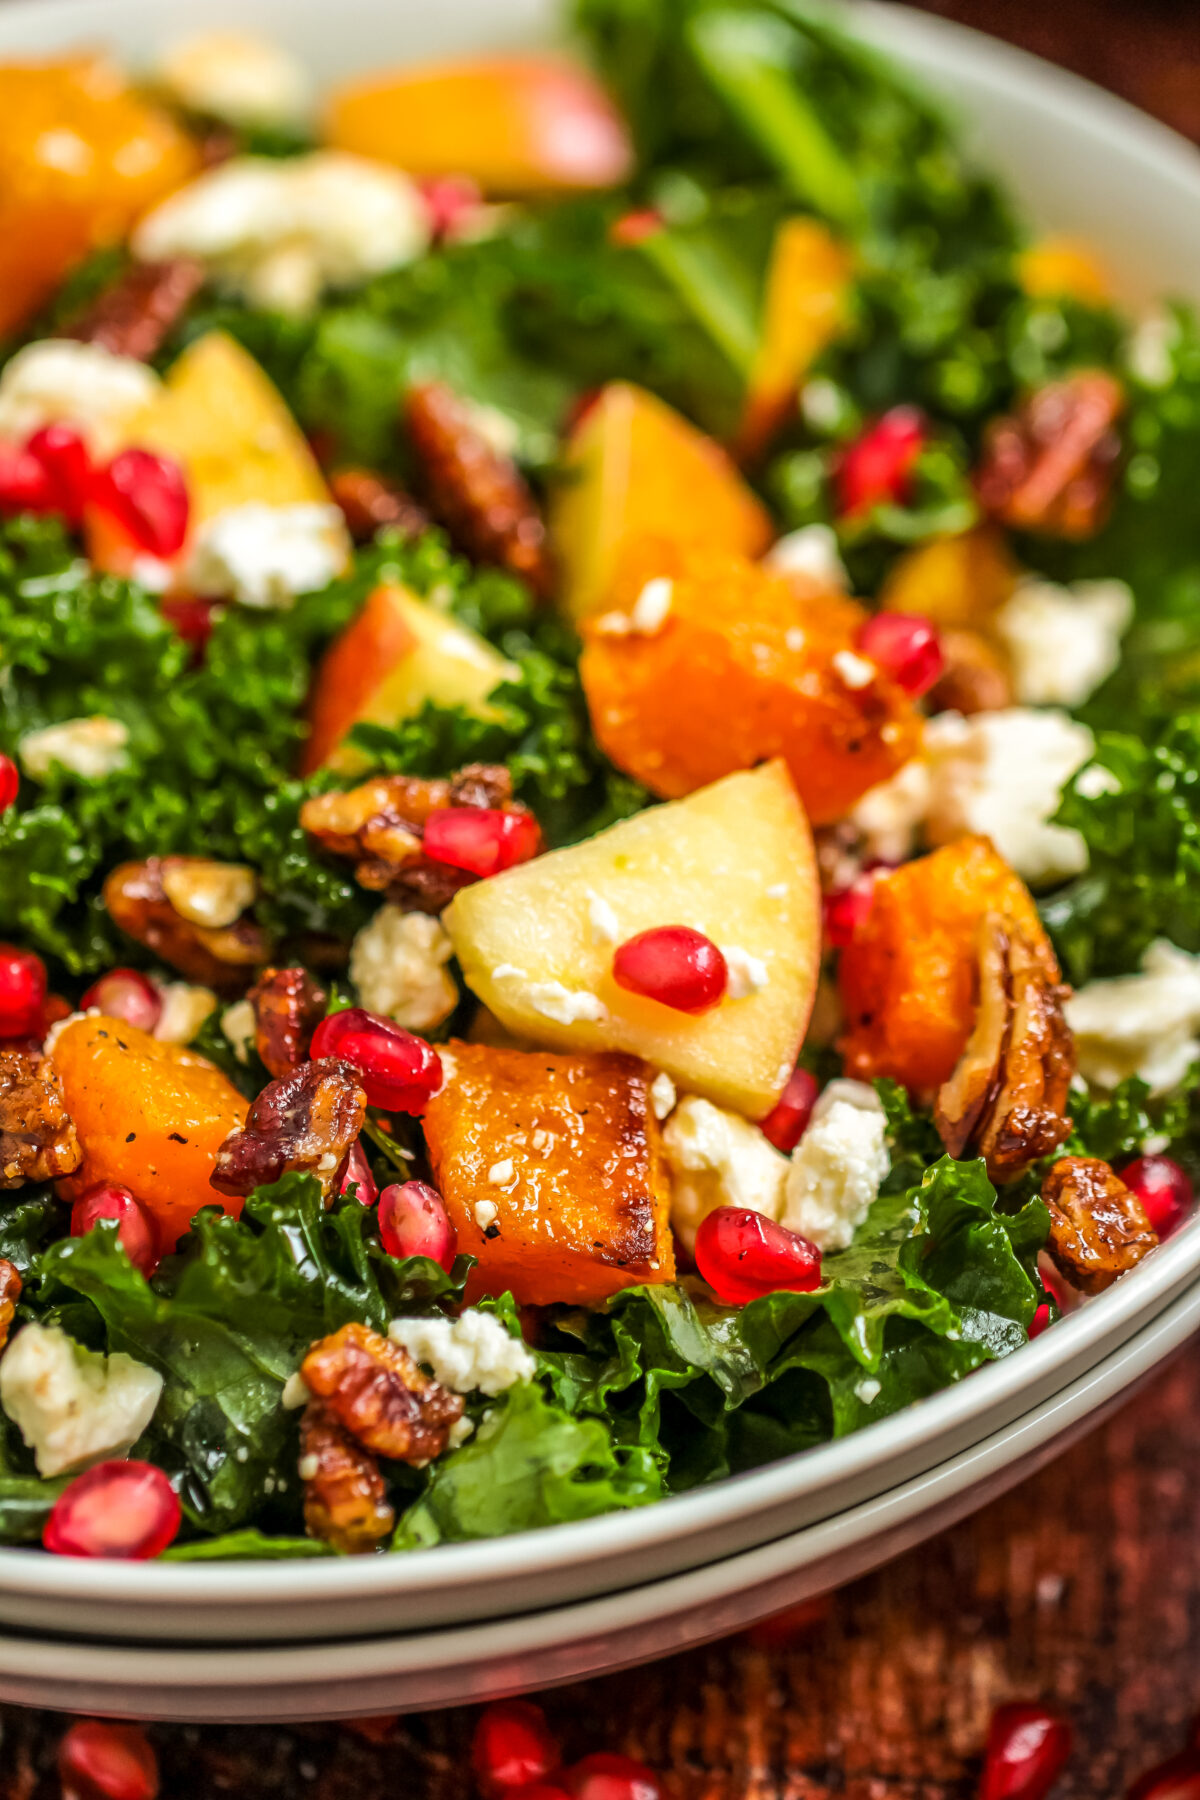 A beautiful salad that's perfect for fall, this Roasted Butternut Squash & Apple Salad recipe features candied pecans and feta cheese.